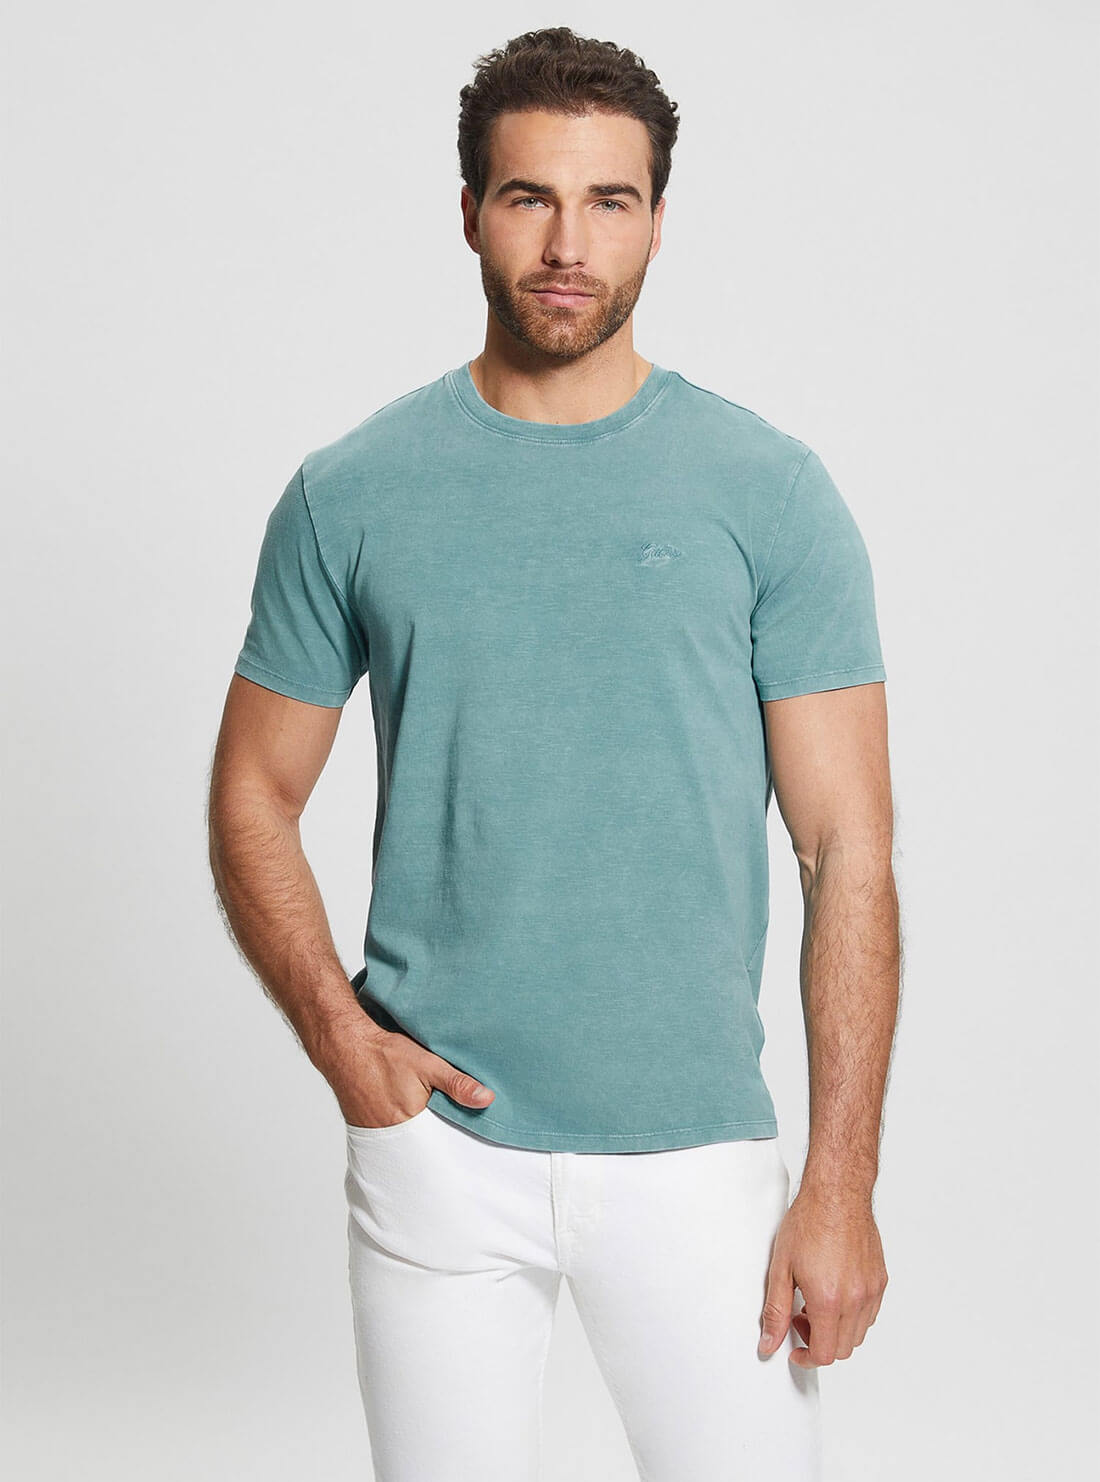 Teal Blue Eli Washed T-Shirt | GUESS Men's Apparel | front view